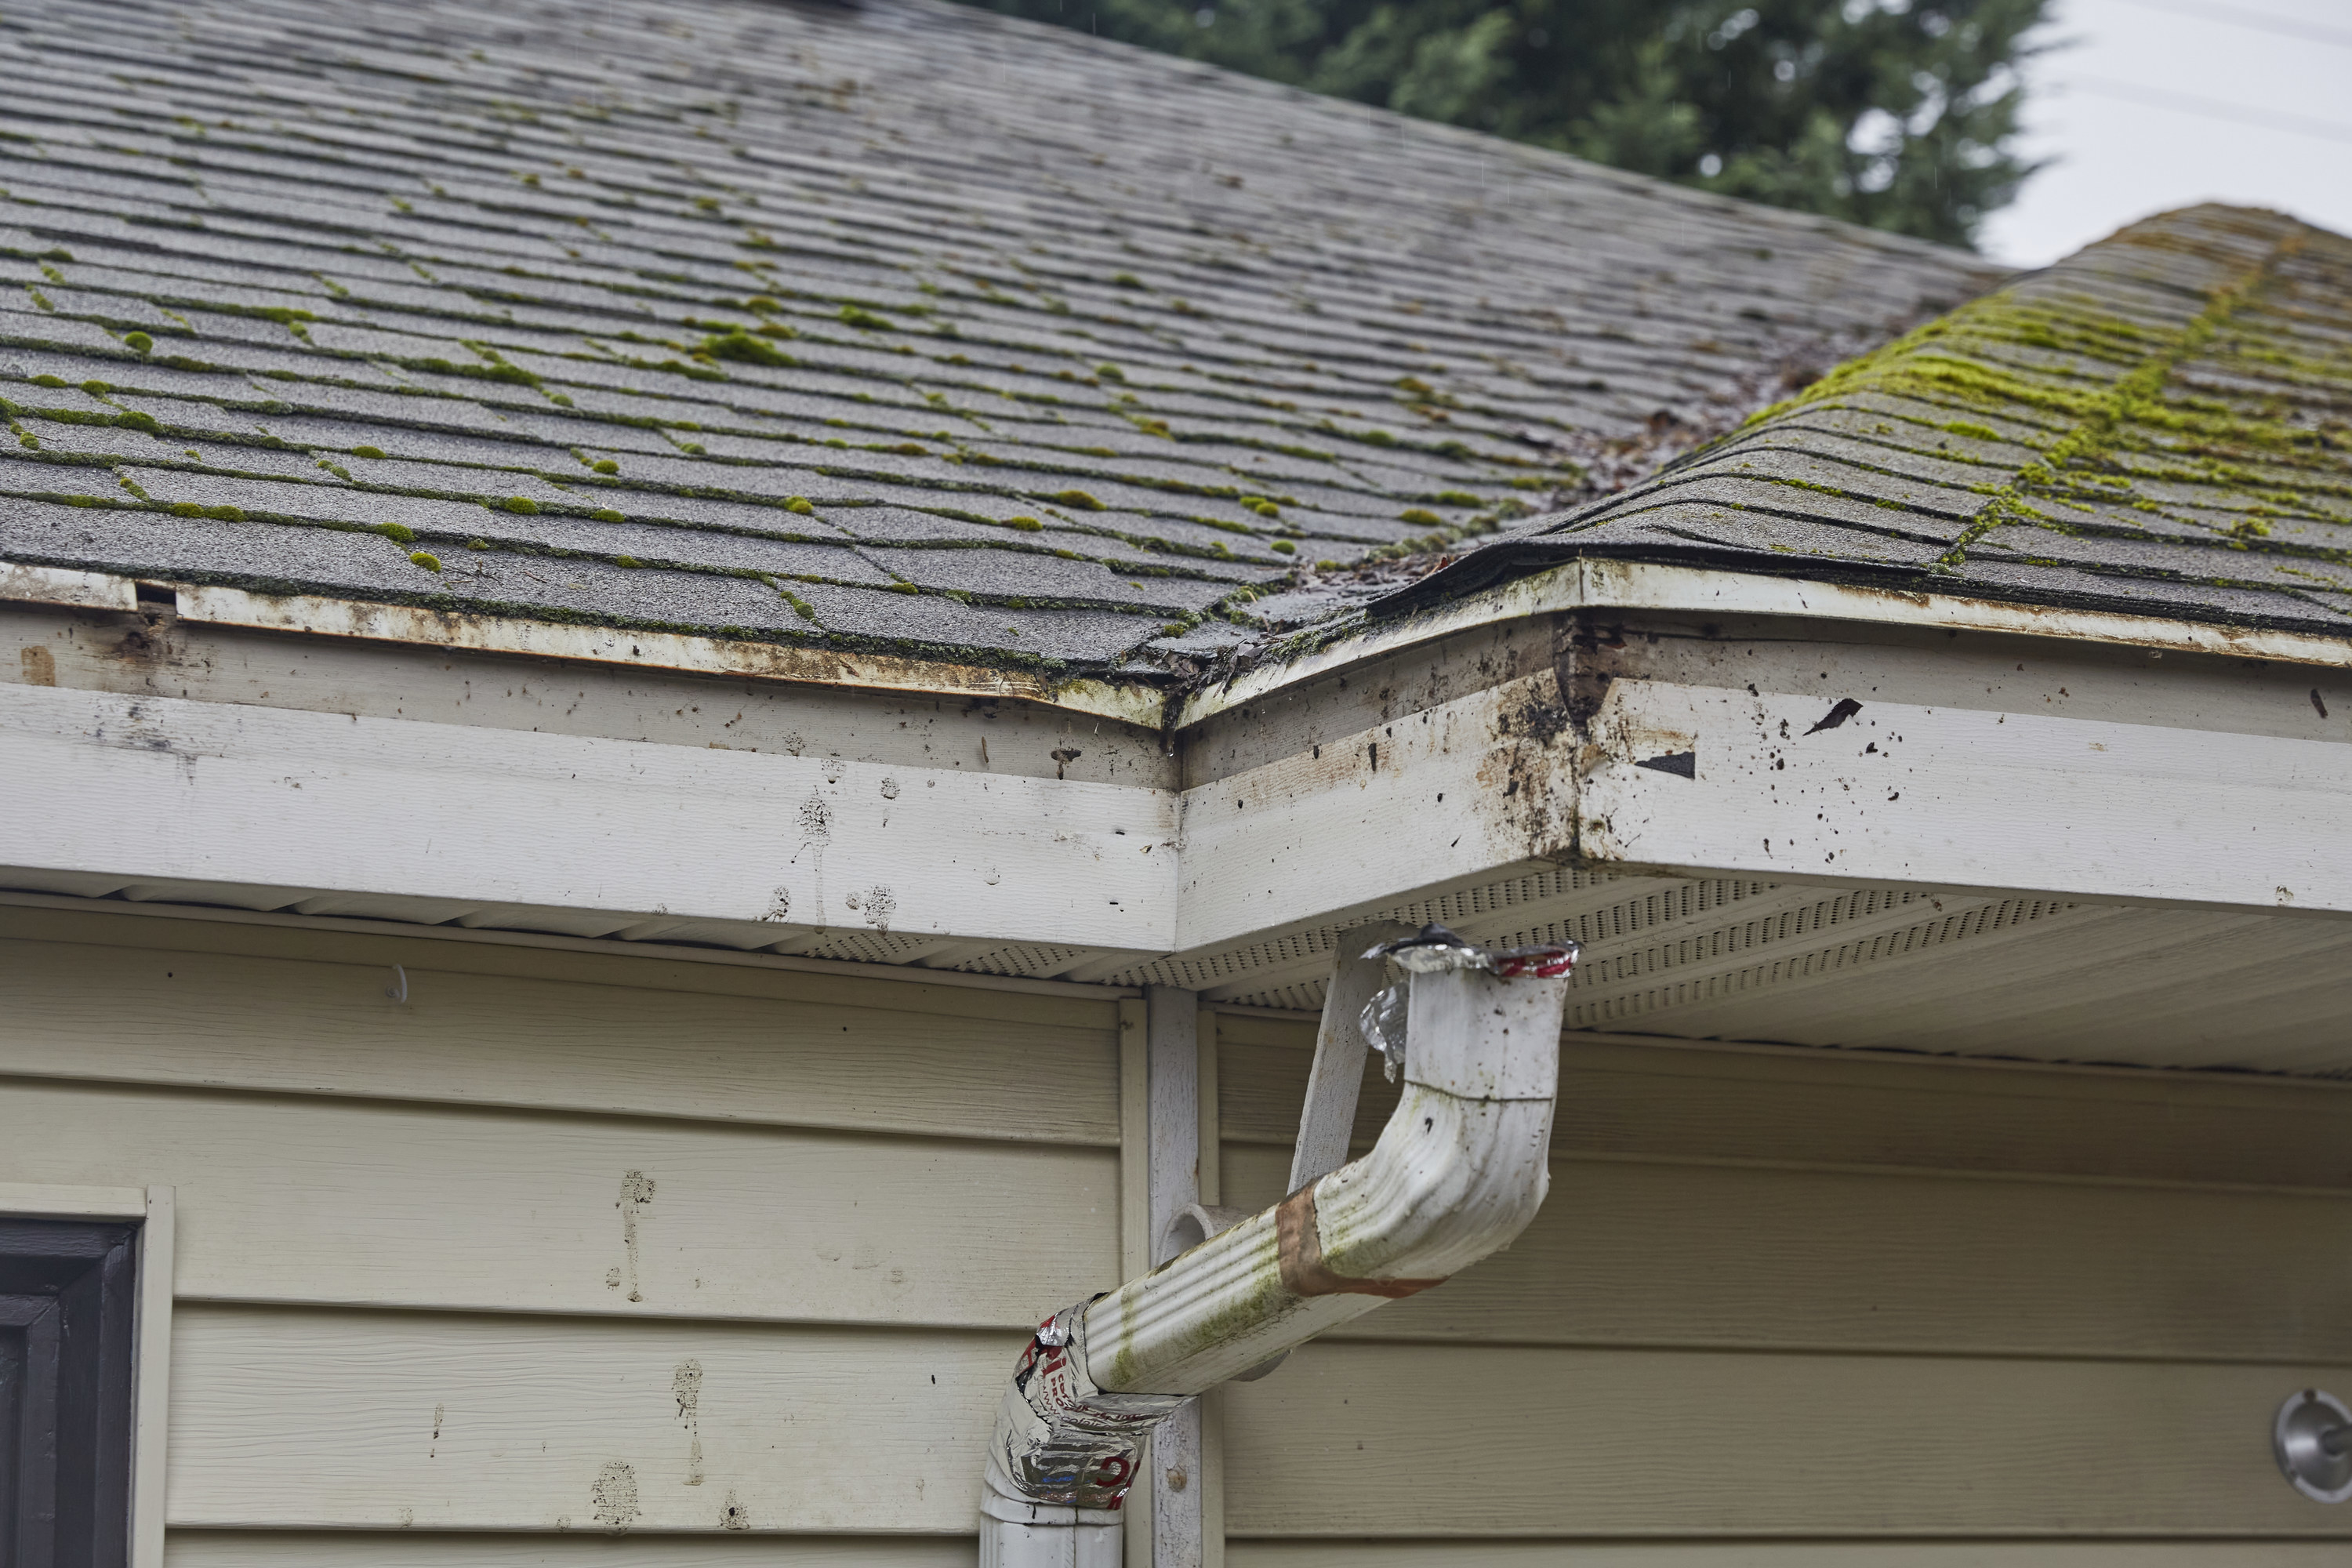 mossy, dirty roof with detached gutter